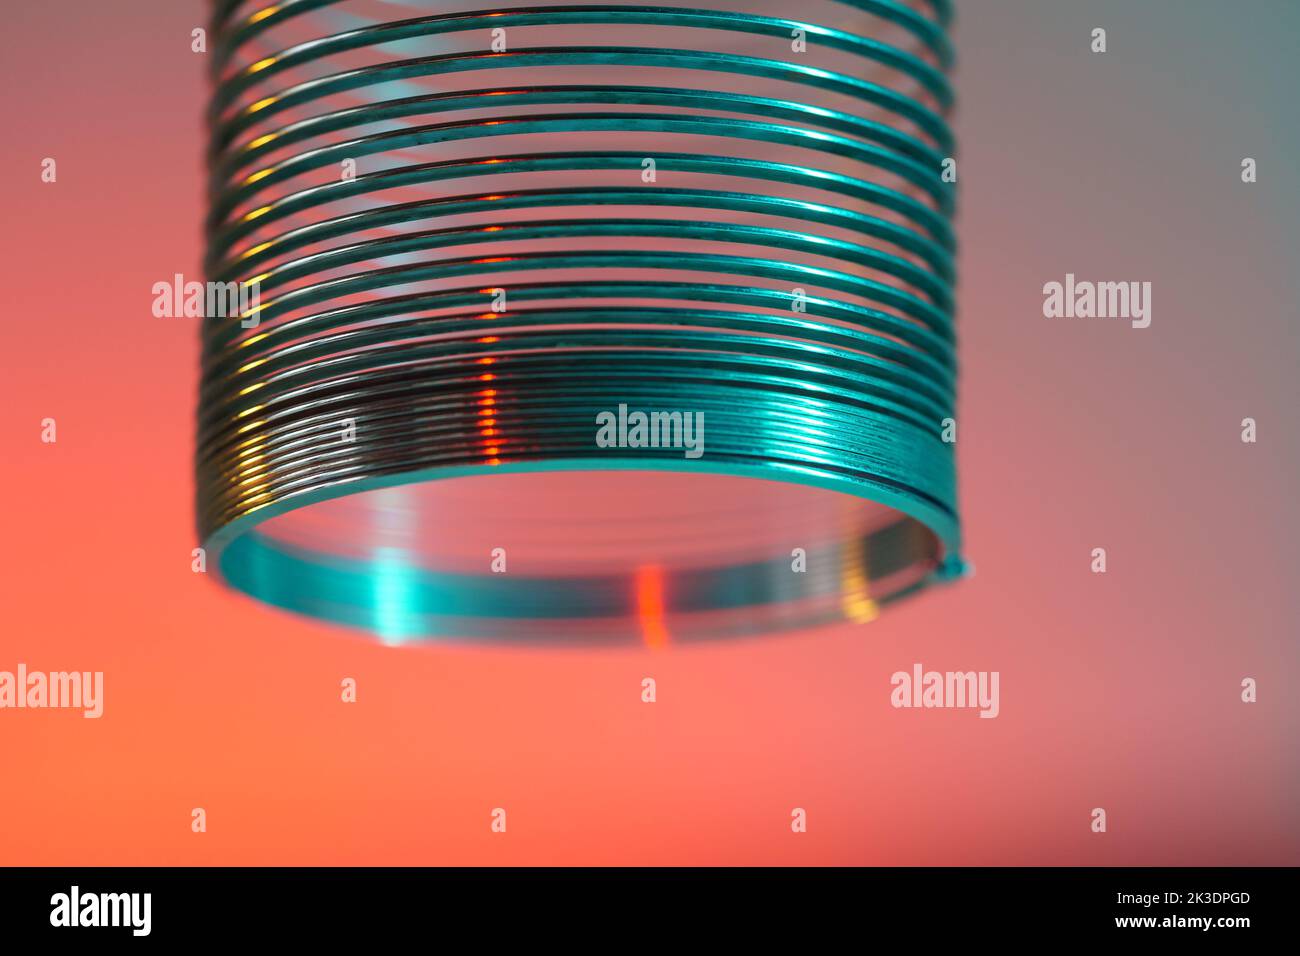 Closeup of coiled metal spring with sufficiently high strength and elastic properties in neon light Stock Photo